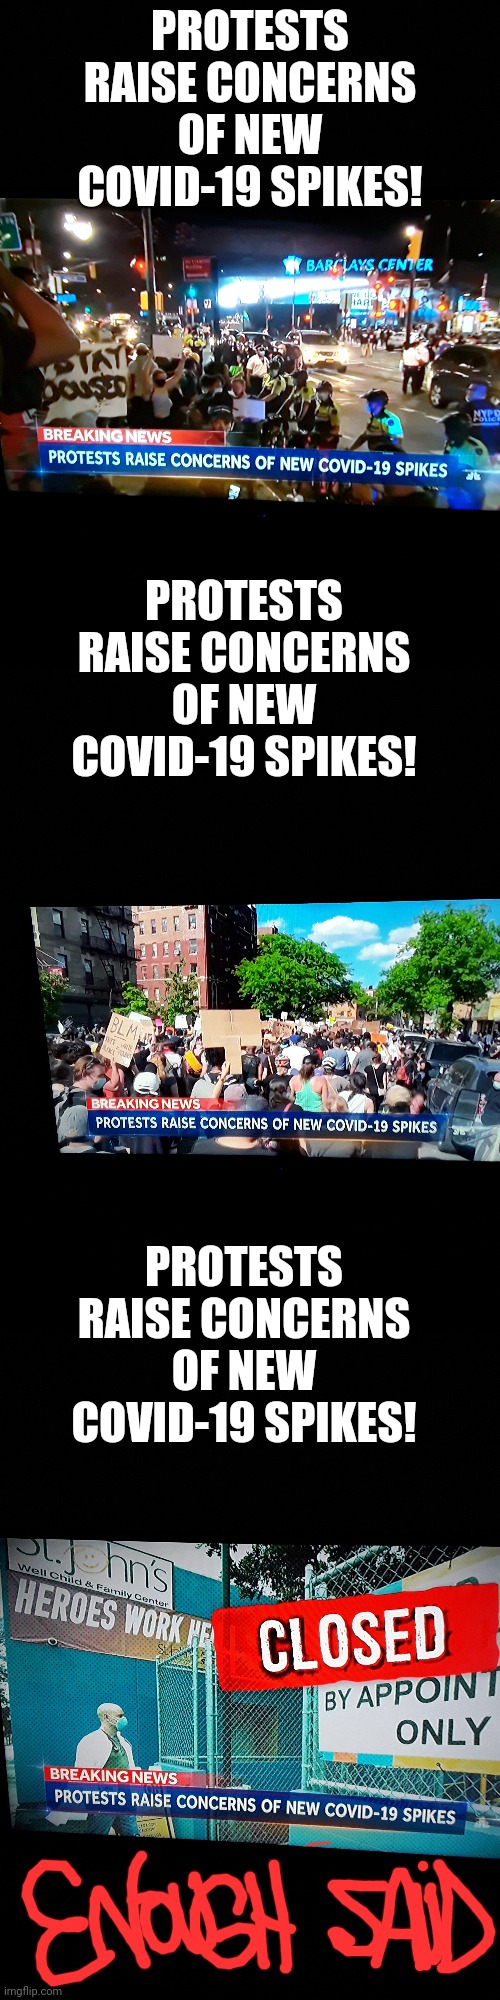 Please folks, practice social distancing!! | PROTESTS RAISE CONCERNS OF NEW COVID-19 SPIKES! PROTESTS RAISE CONCERNS OF NEW COVID-19 SPIKES! PROTESTS RAISE CONCERNS OF NEW COVID-19 SPIKES! | image tagged in covid-19,stay safe,riots | made w/ Imgflip meme maker